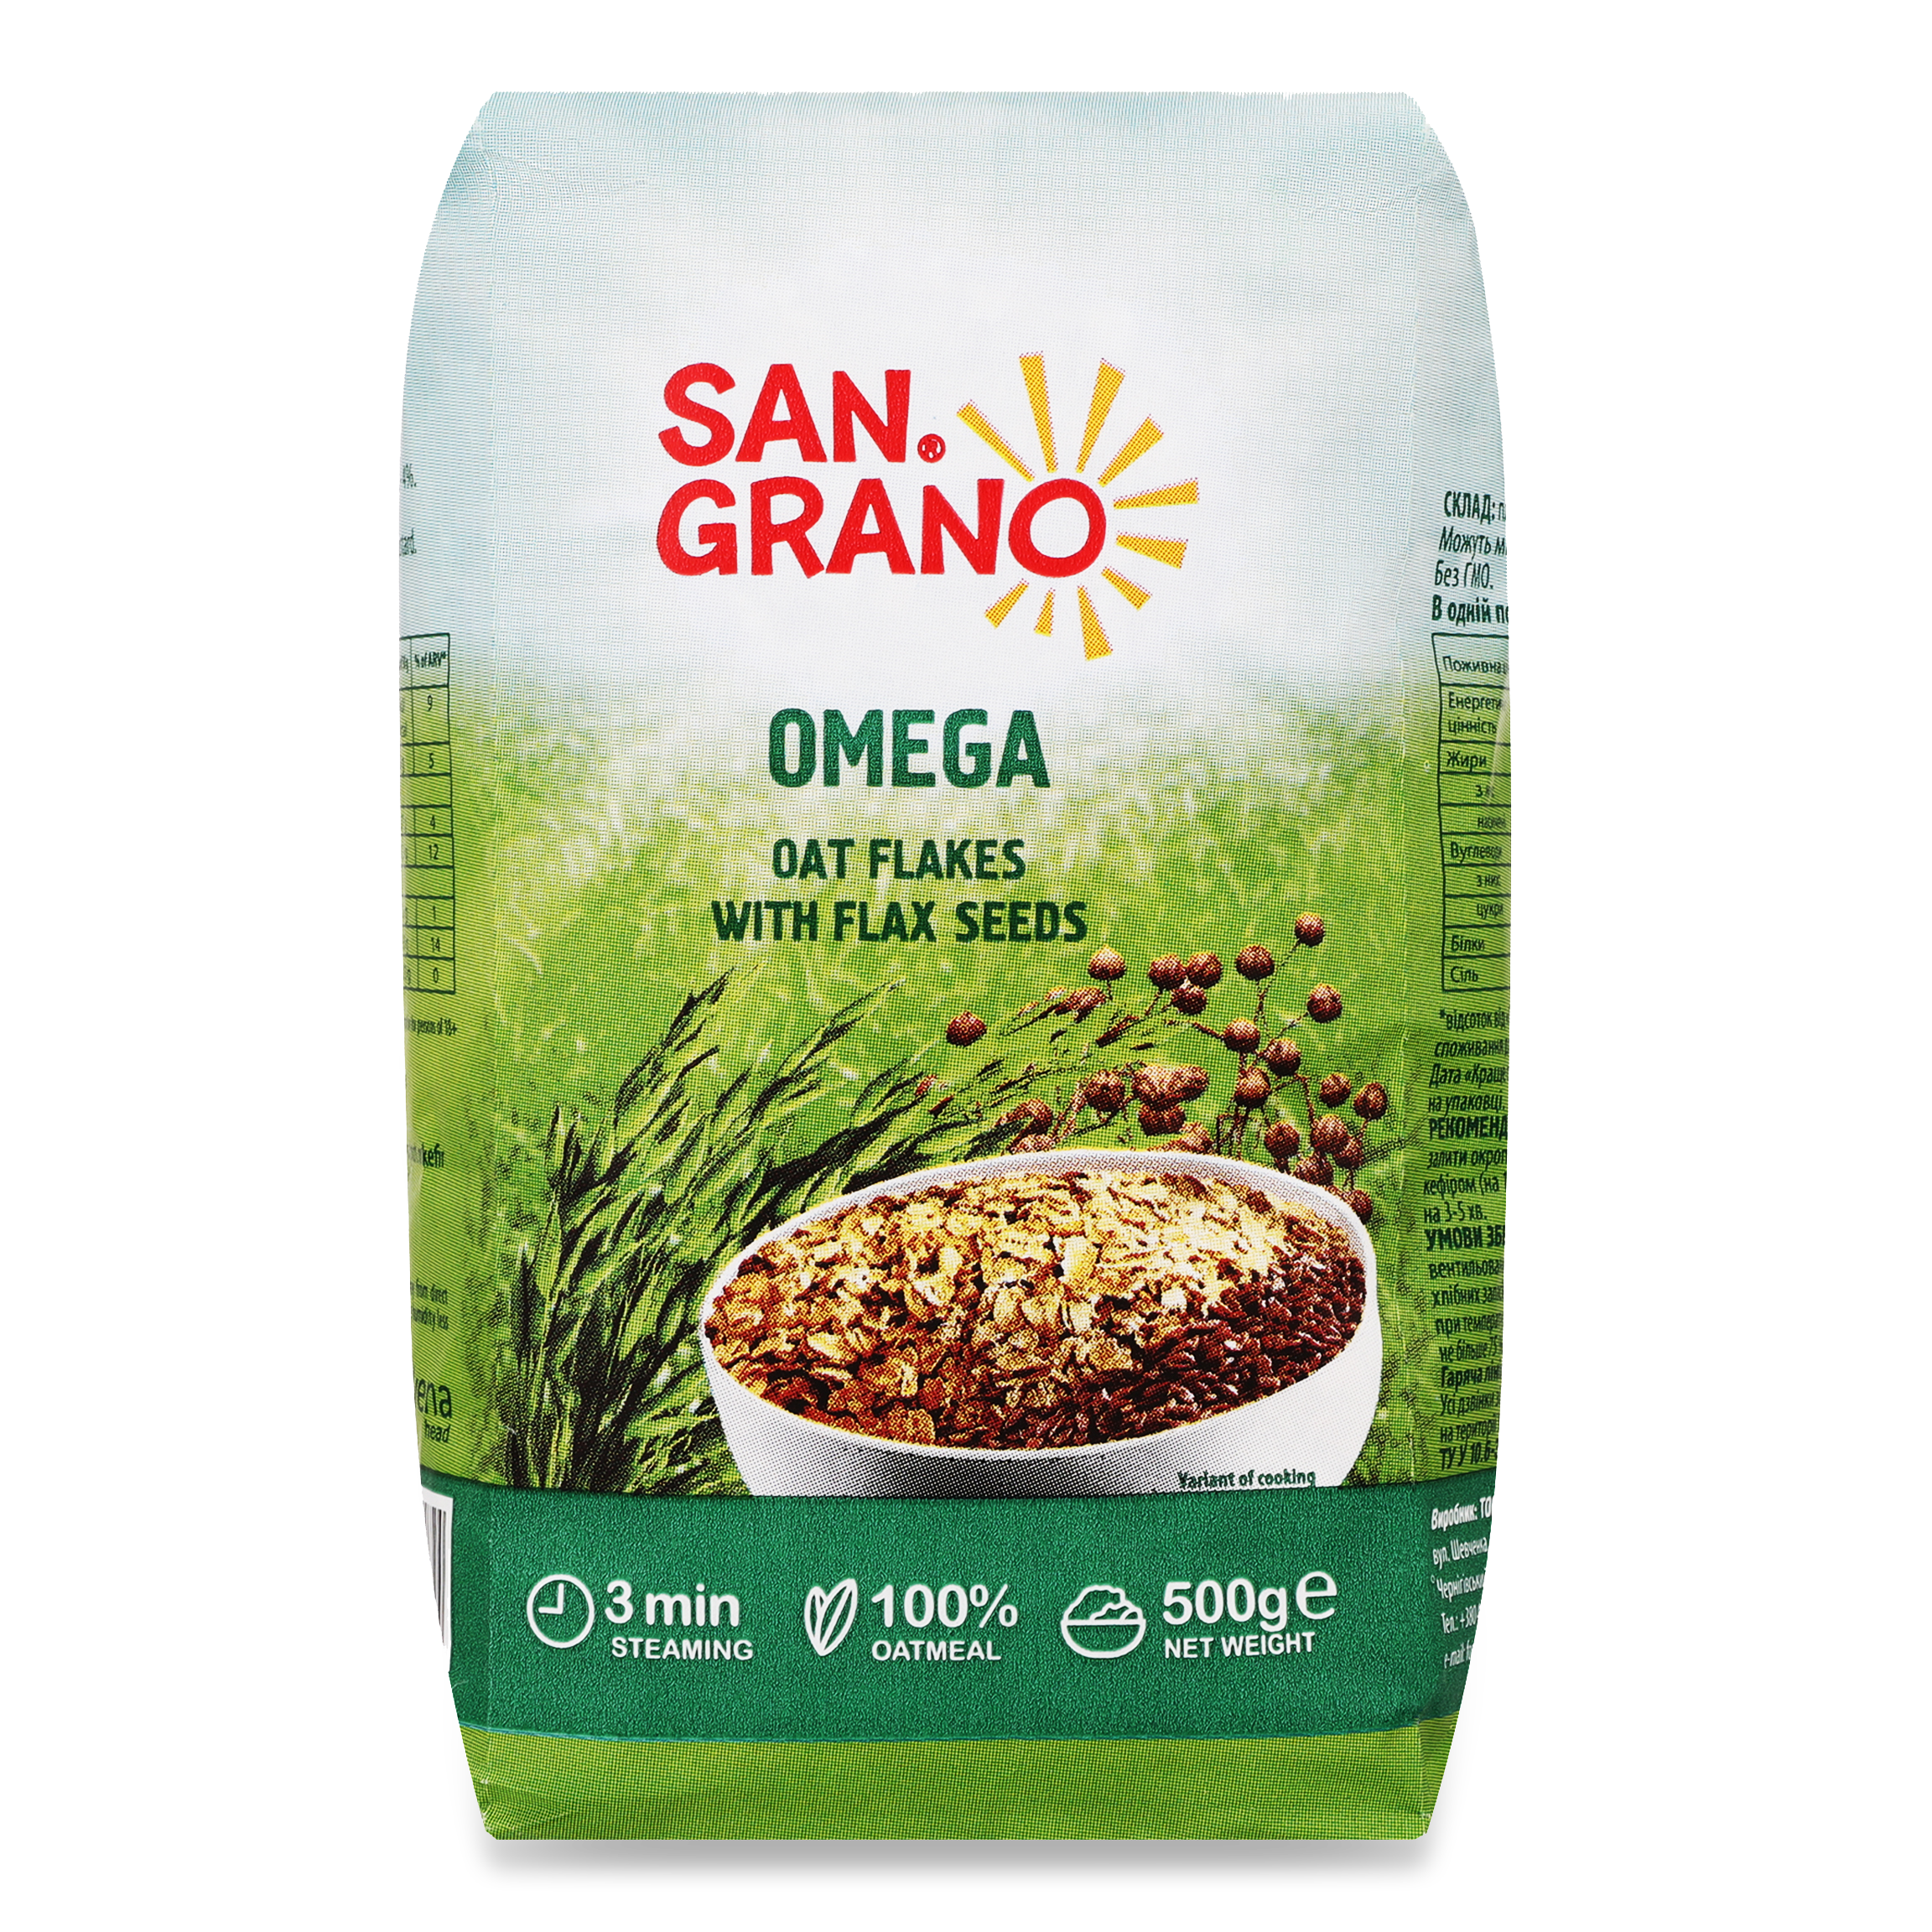 San grano with flax seeds oat flakes 500g